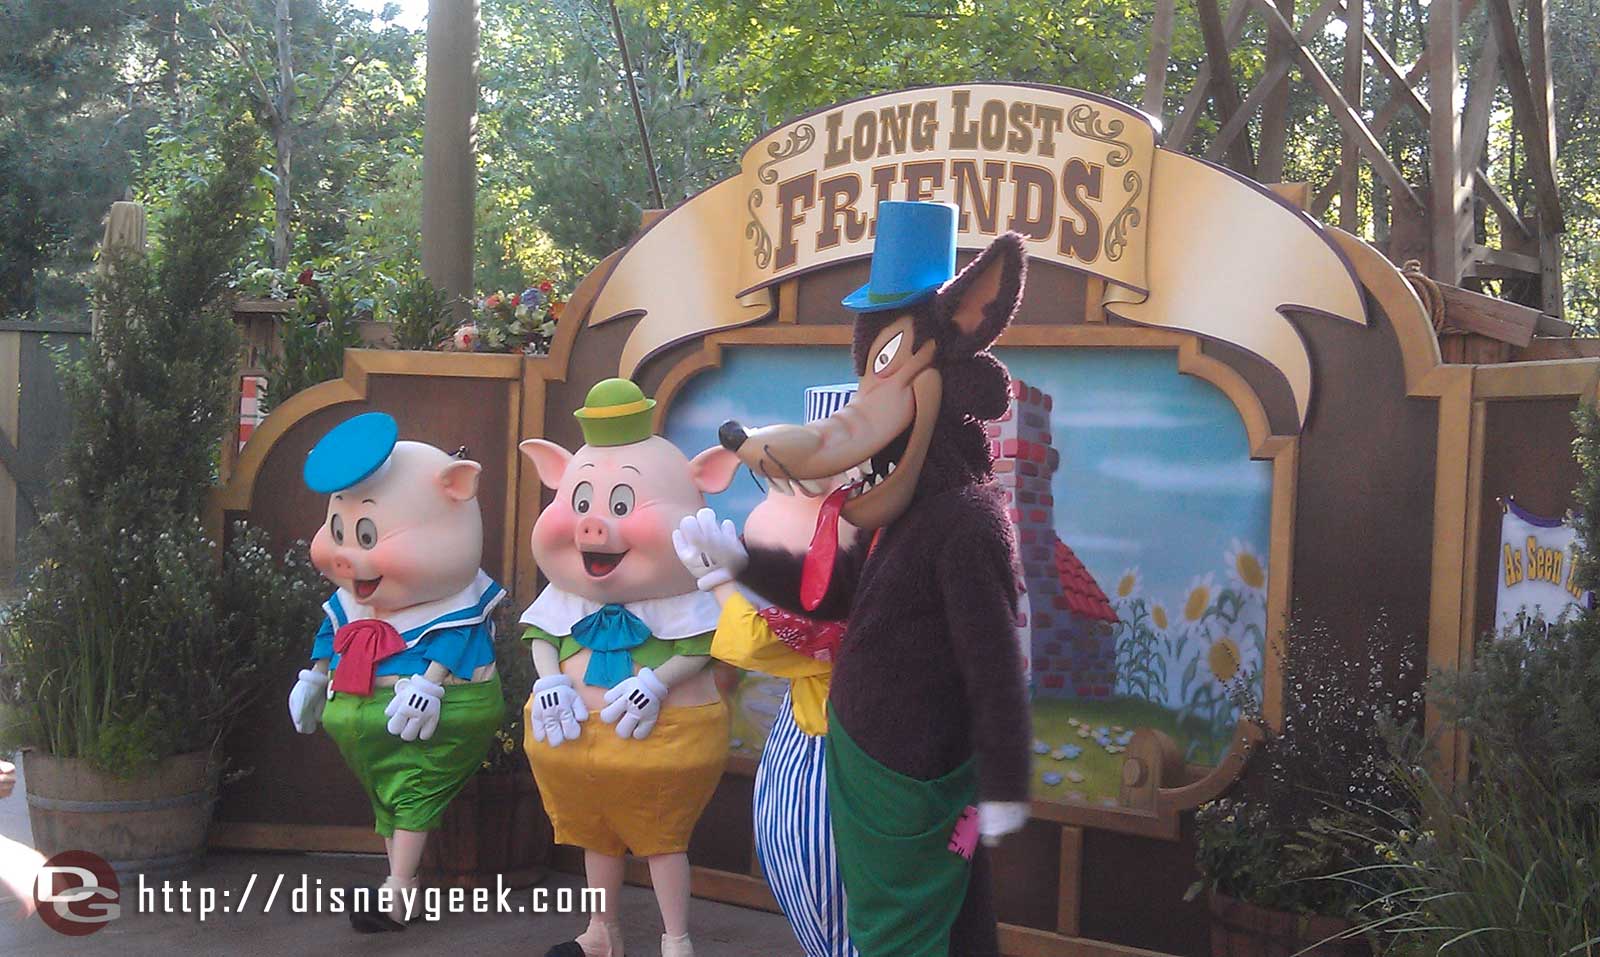 The Three Little Pigs and Big Bad Wolf at longlostfriendsweek limitedtimemagic